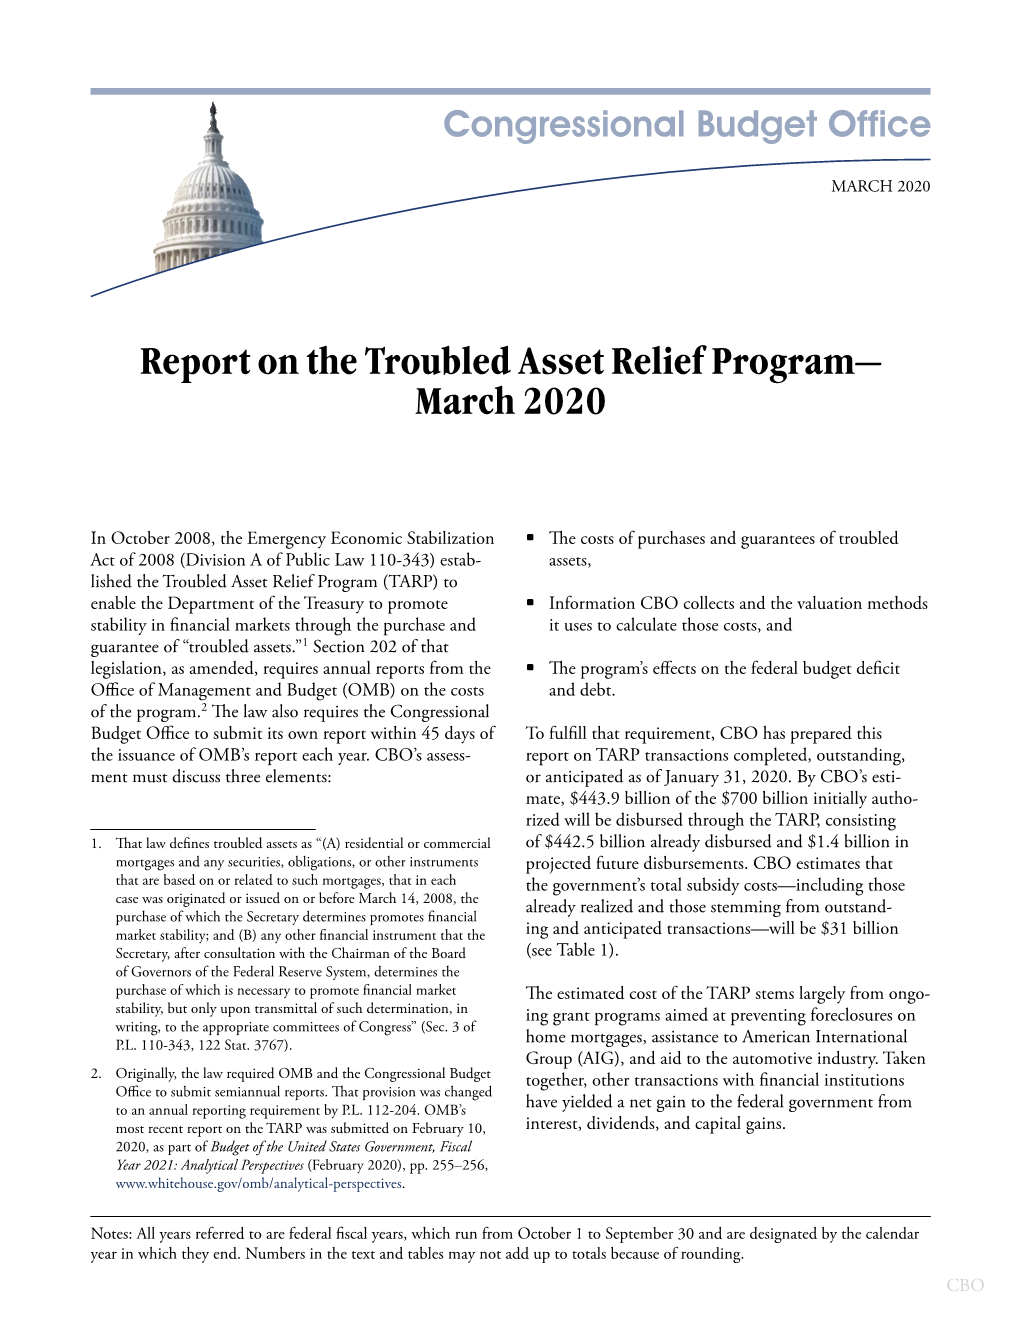 Troubled Asset Relief Program— March 2020